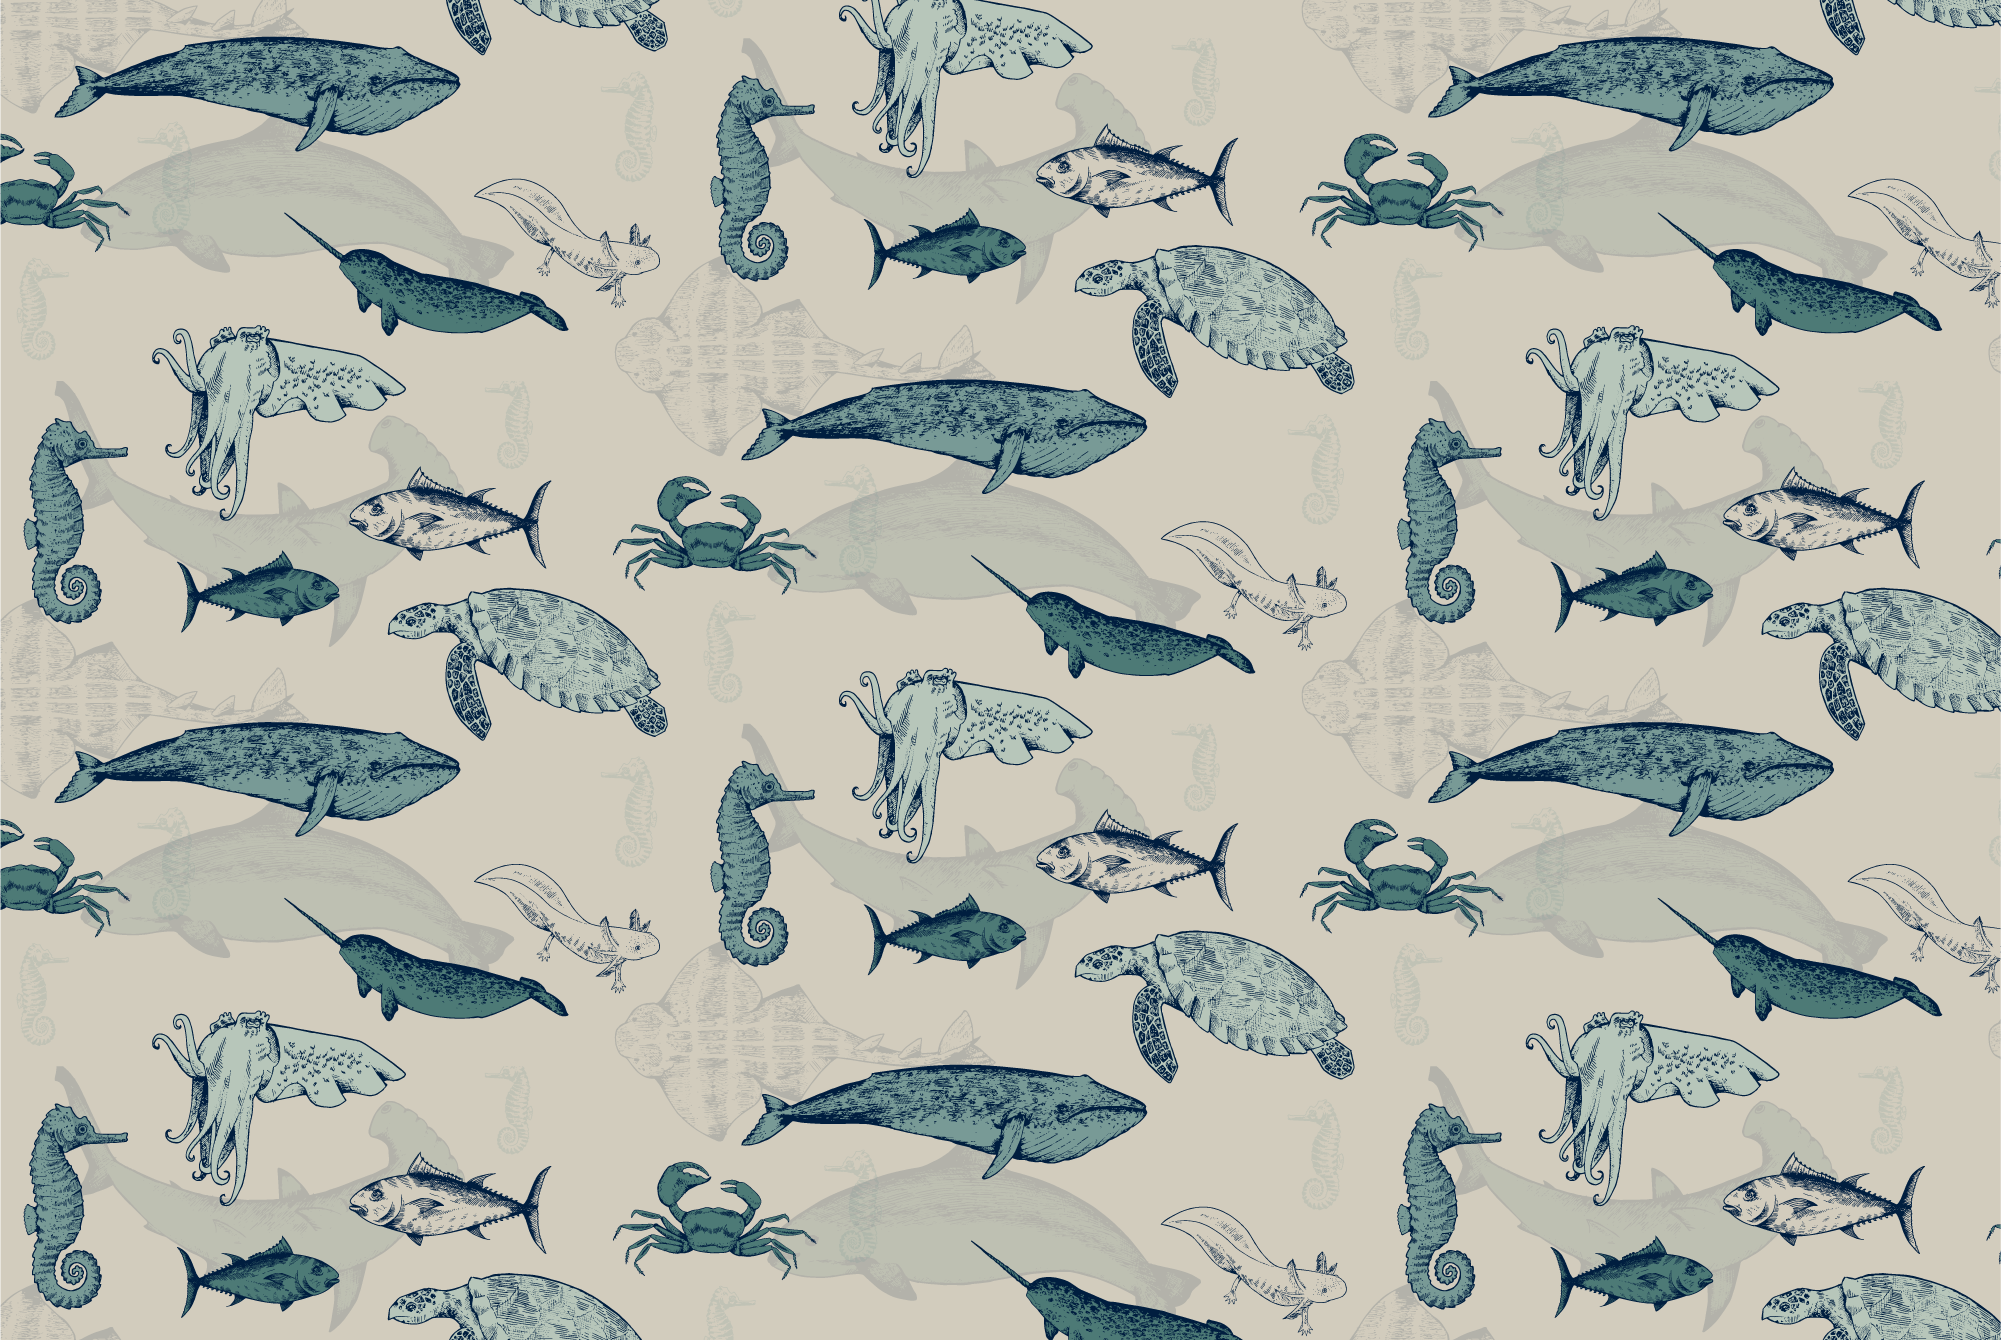 Pattern design by Sophie Leven of eleven endangered sea animal species. Digital illustrations consist of dark blue linework combined with a spectrum of blue block colour, on a beige background.